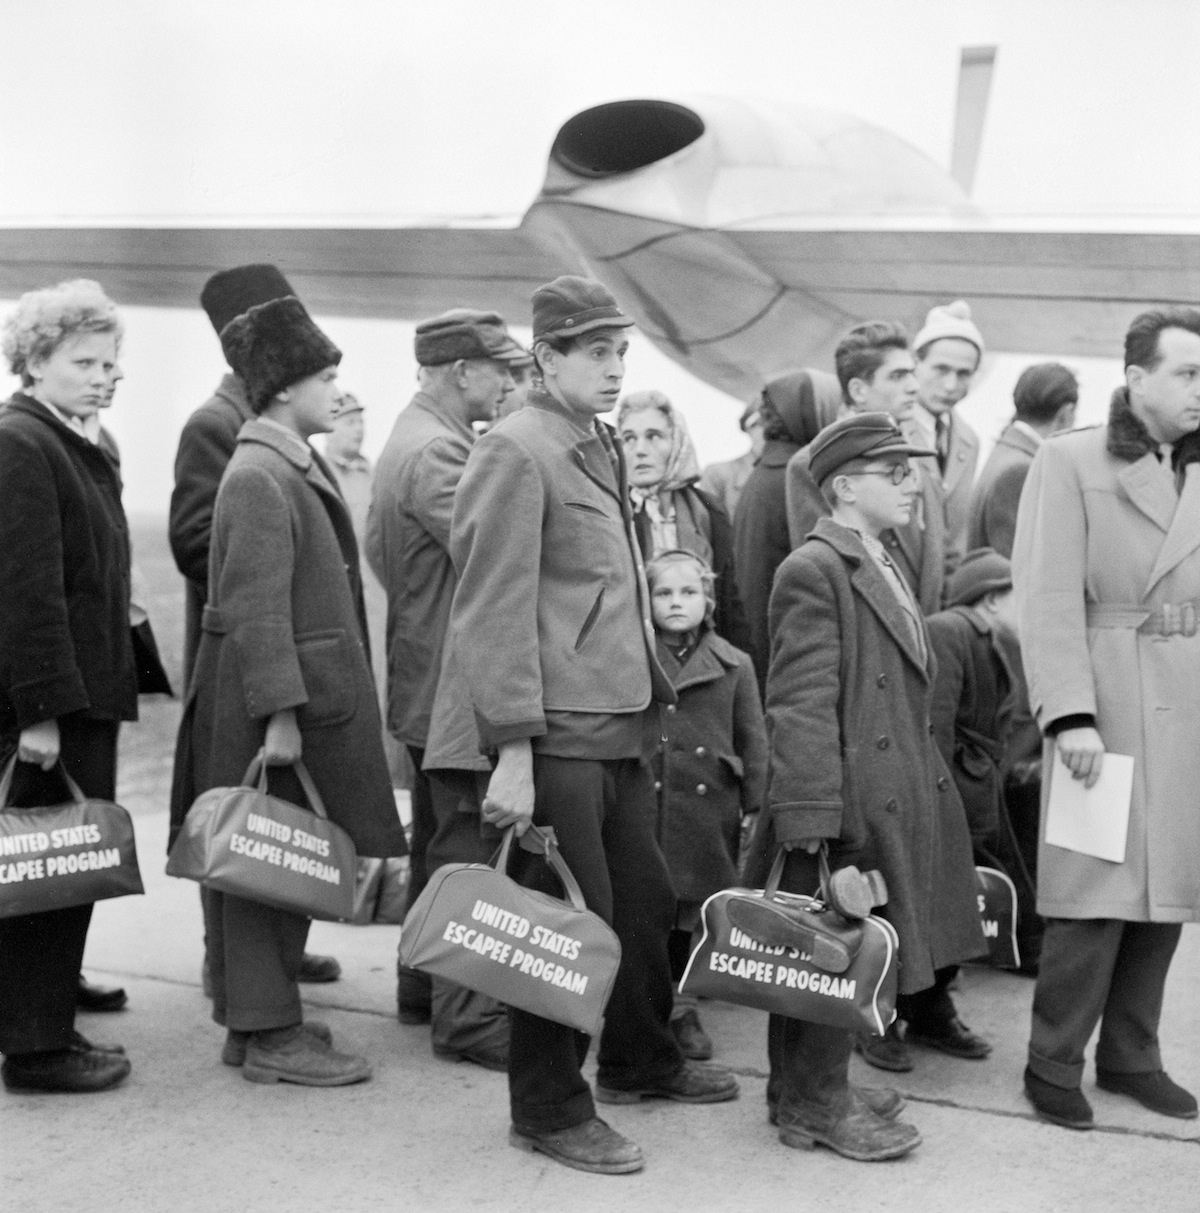 Hungarian refugees bording the plane for America